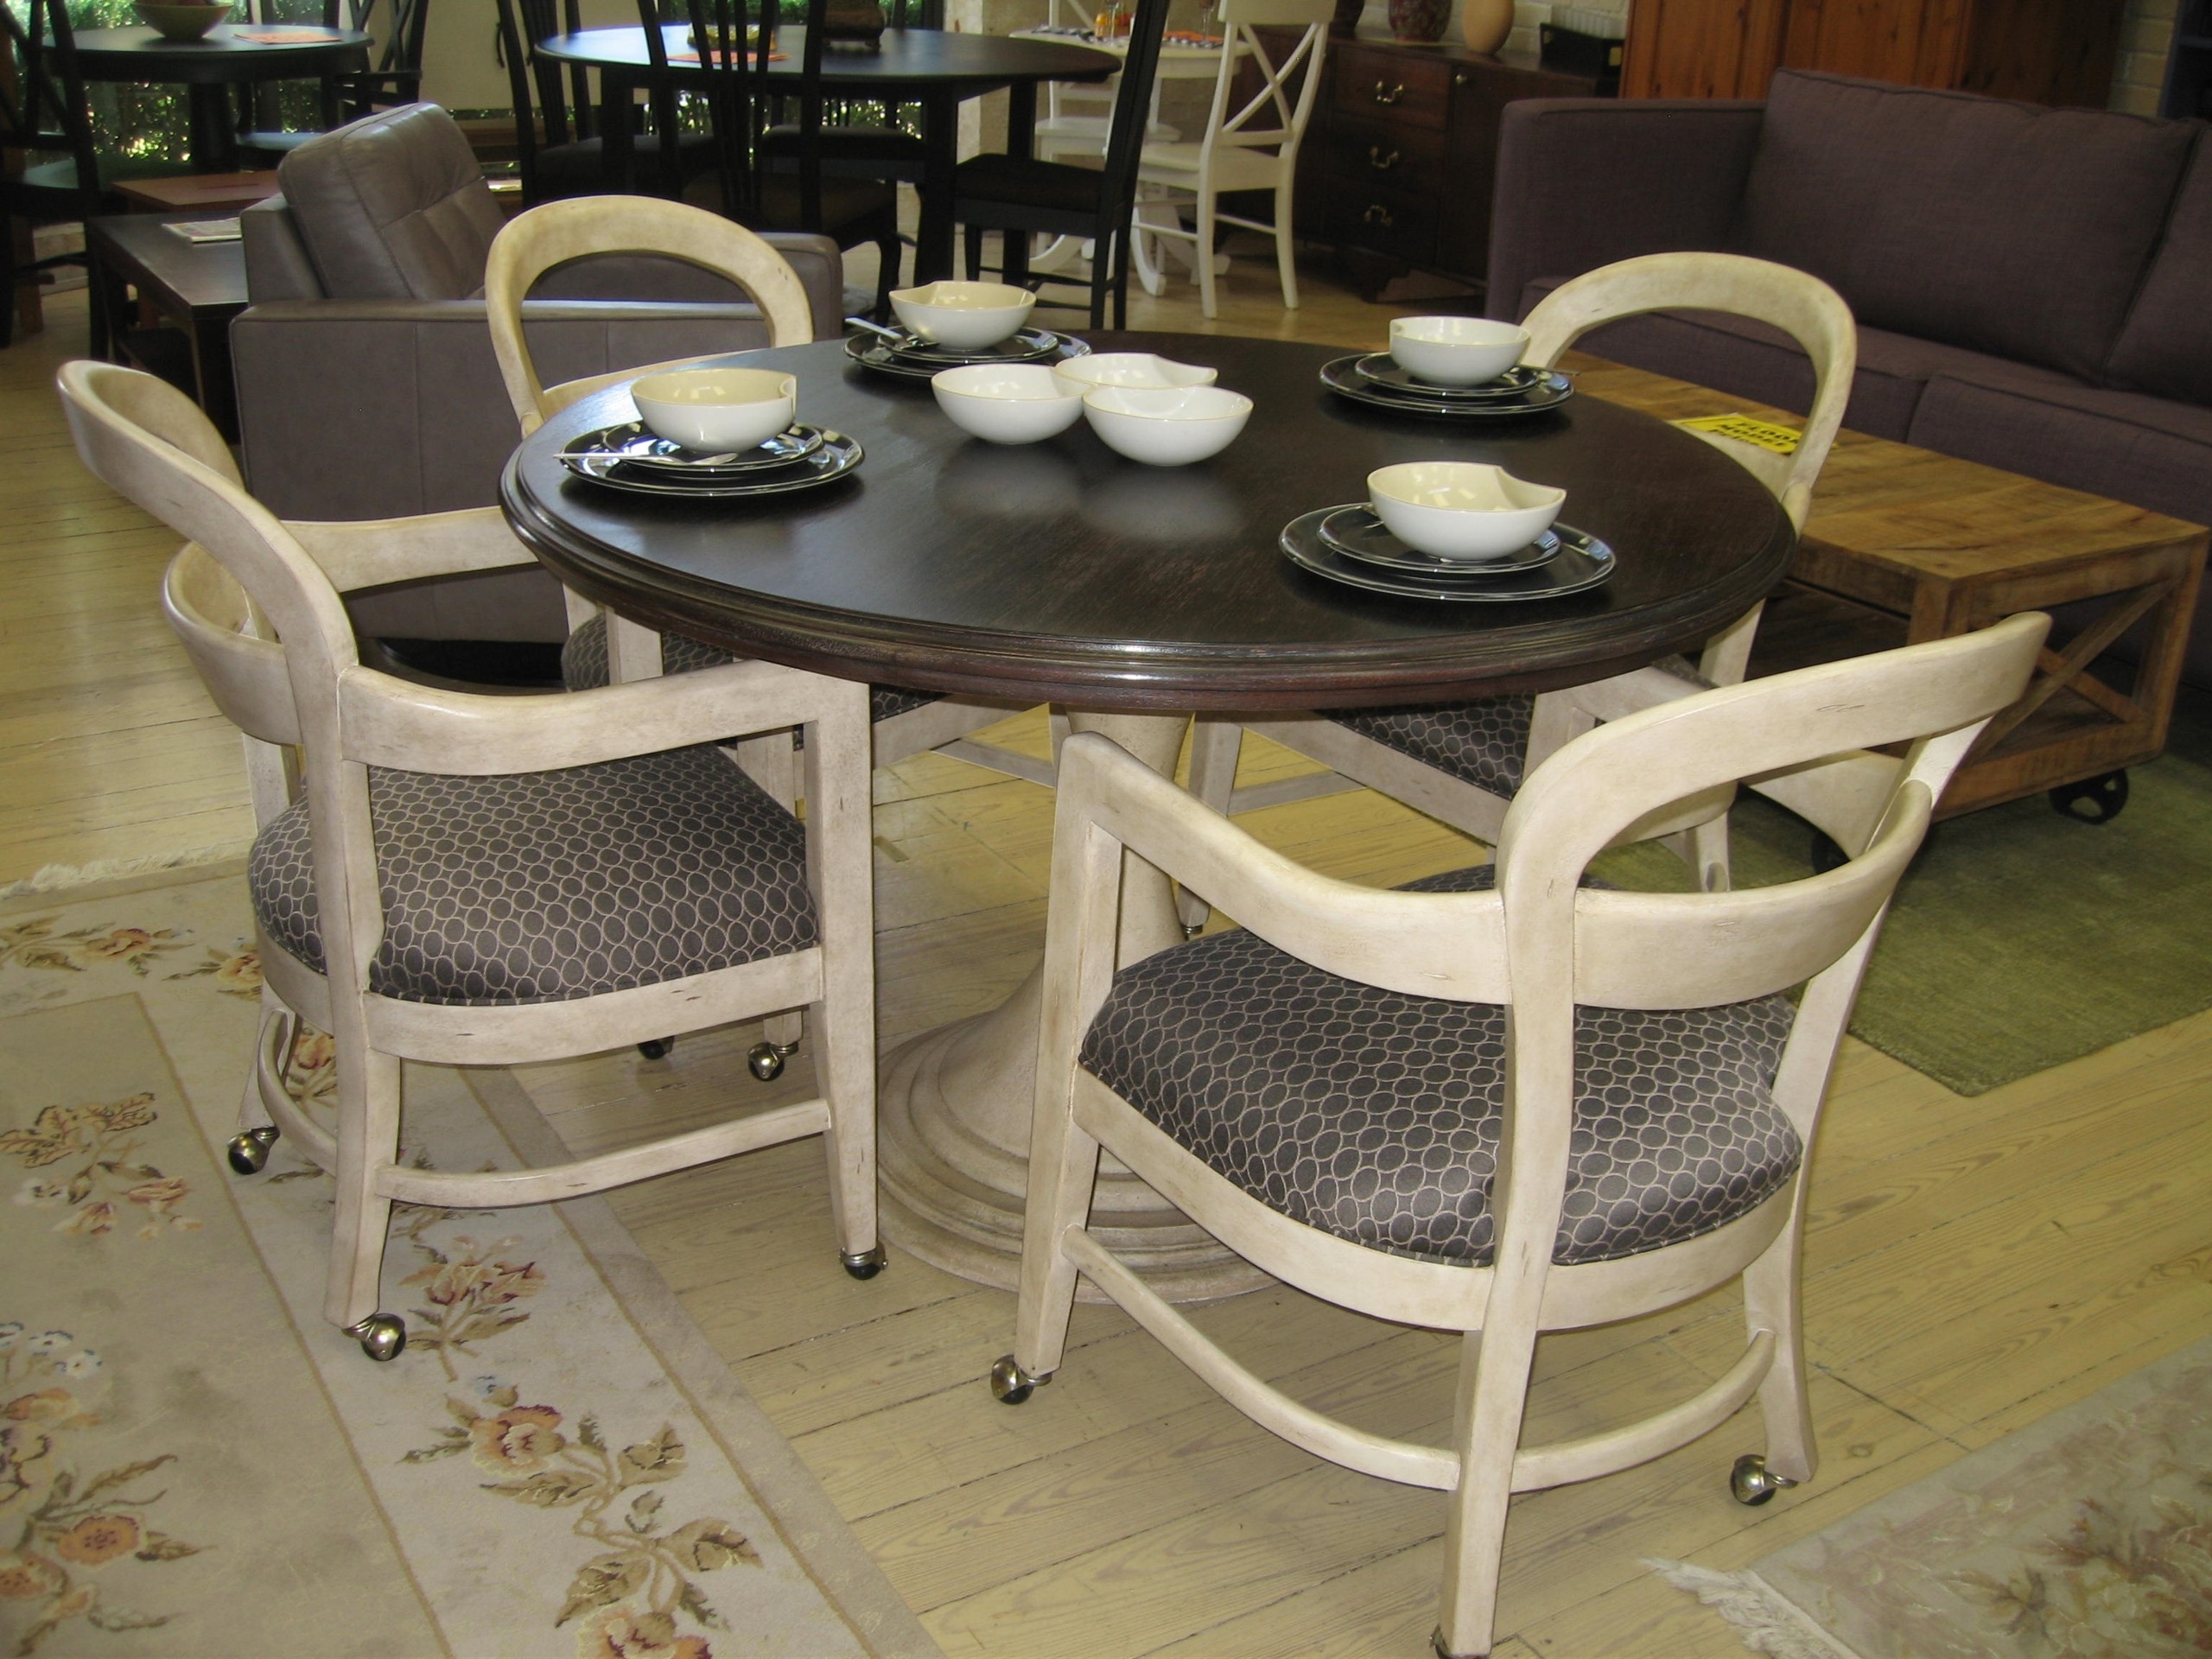 Dining Room Chairs With Casters - Ideas on Foter